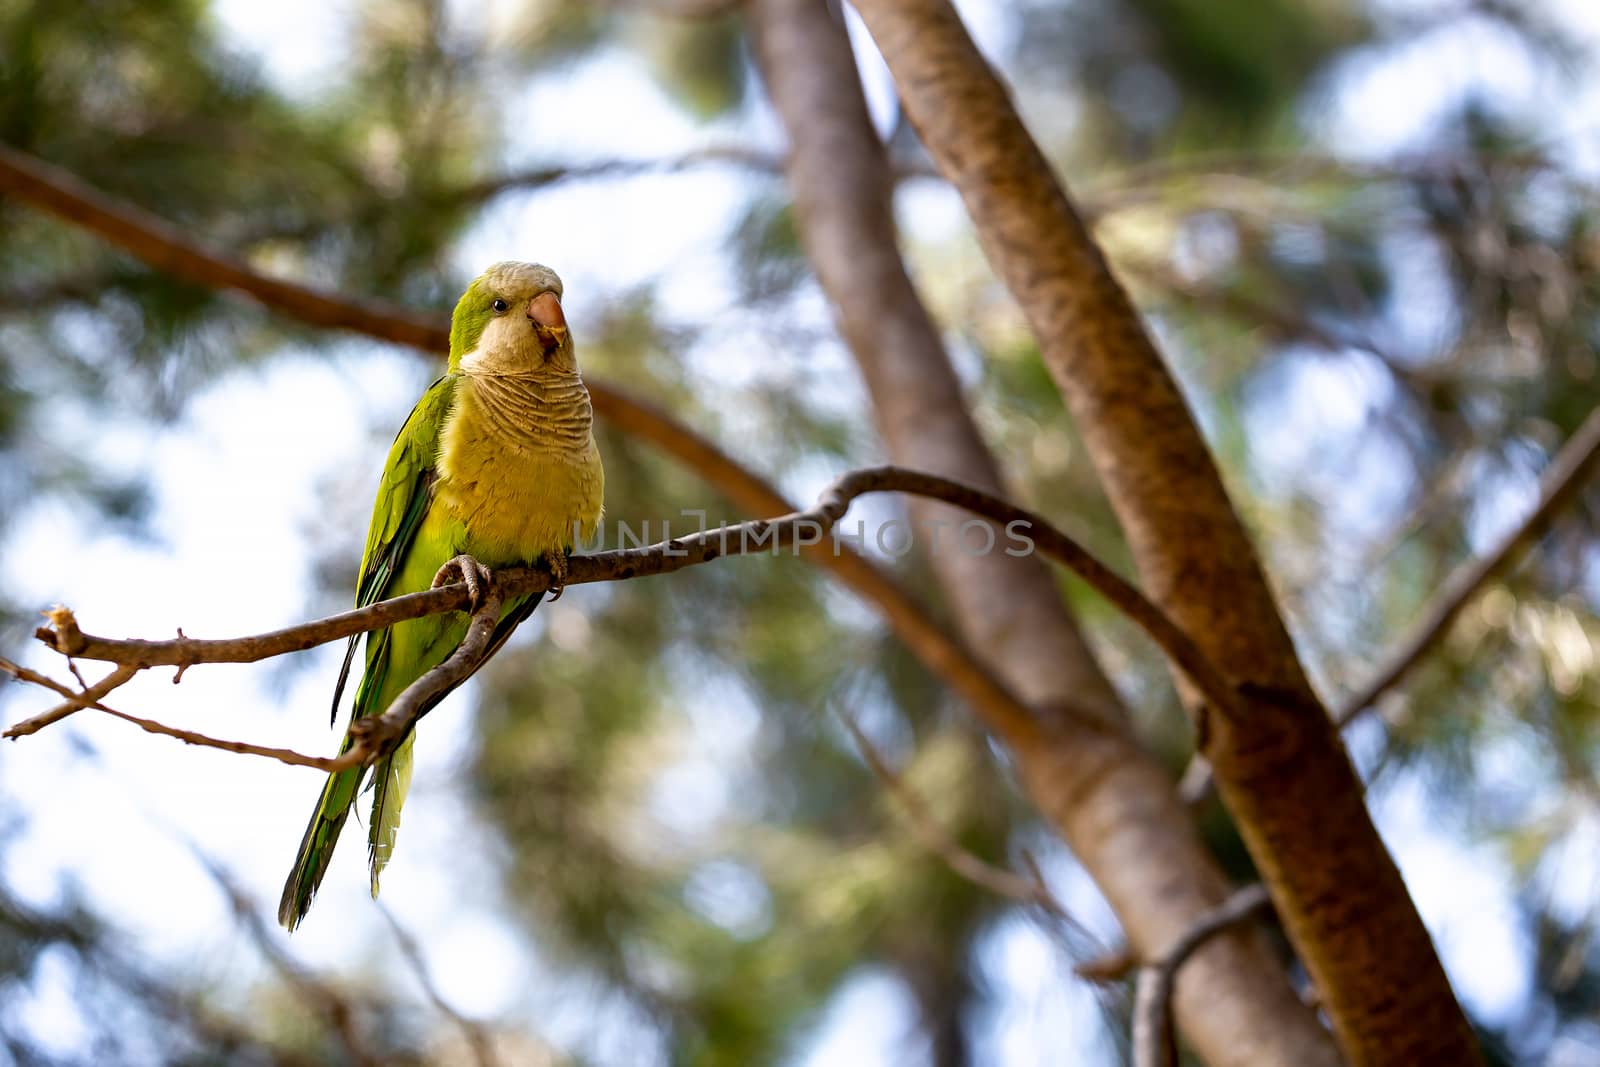 Yellow-green parrot sitting on a pine tree branch on the park.